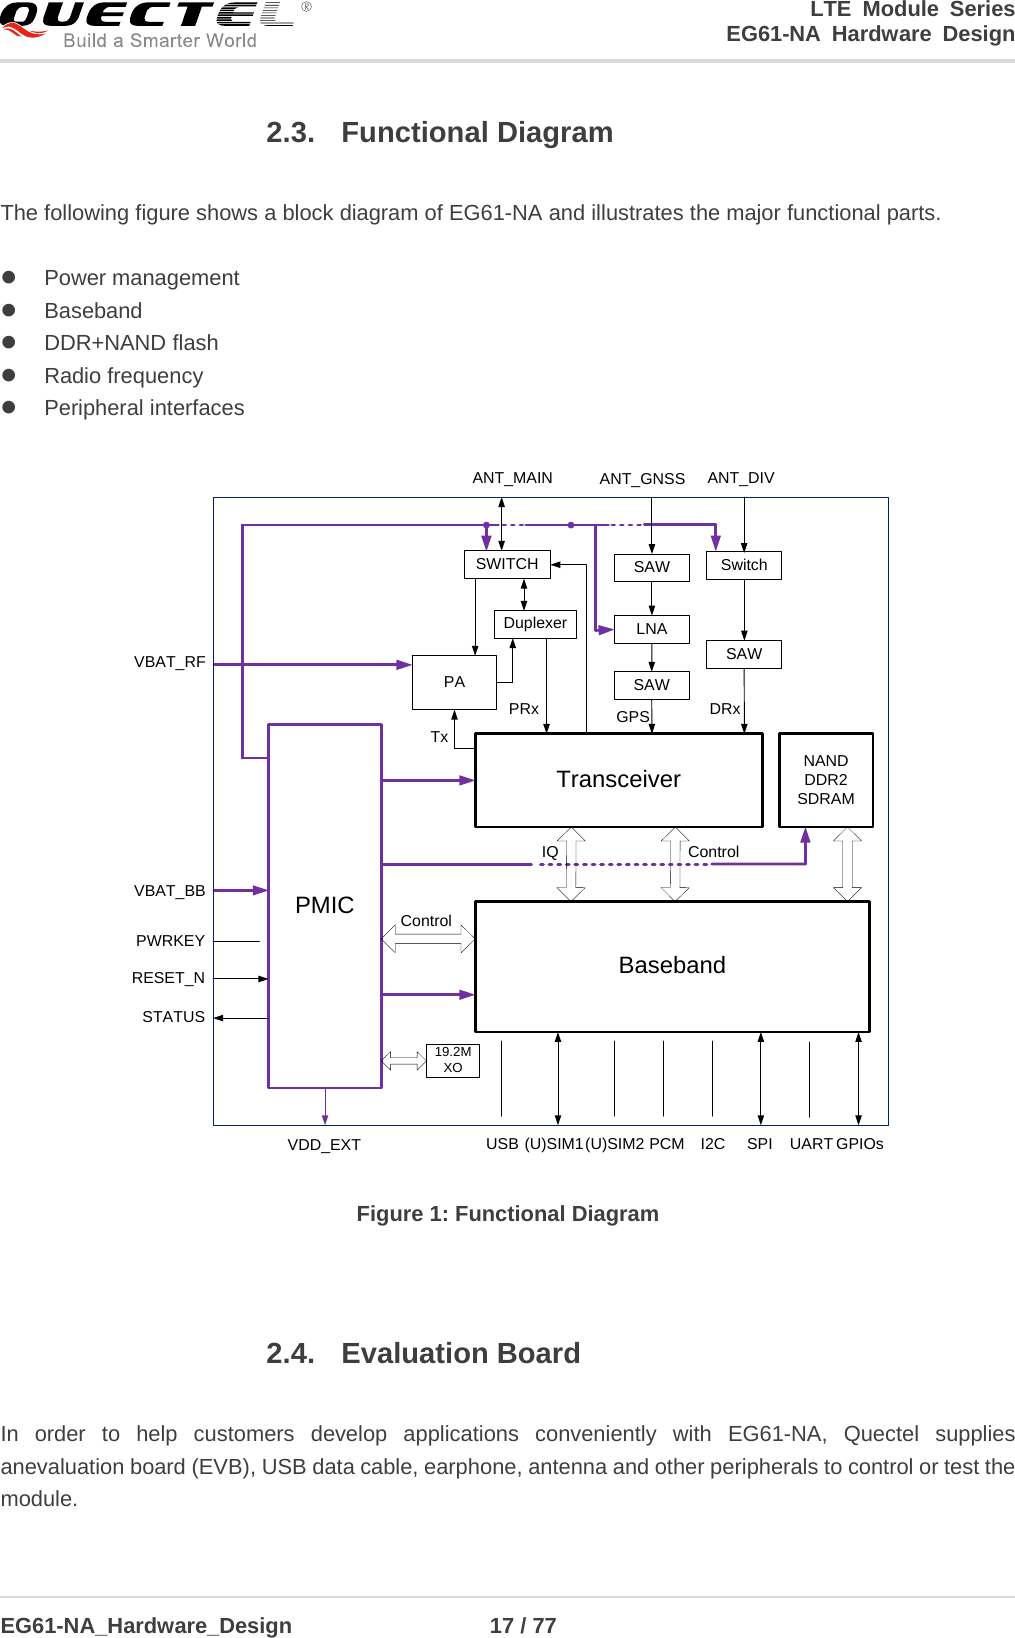 LTE Module Series                                                  EG61-NA Hardware Design  EG61-NA_Hardware_Design                  17 / 77    2.3. Functional Diagram  The following figure shows a block diagram of EG61-NA and illustrates the major functional parts.     Power management  Baseband  DDR+NAND flash  Radio frequency    Peripheral interfaces BasebandPMICTransceiverNANDDDR2SDRAMPASWITCH SwitchANT_MAIN ANT_DIVVBAT_BBVBAT_RFPWRKEYVDD_EXT USB PCM UARTI2CRESET_N19.2MXOSTATUSGPIOsControlIQ ControlDuplexerSAWTxPRx DRx(U)SIM2 SPI(U)SIM1SAWLNAANT_GNSSSAWGPS Figure 1: Functional Diagram  2.4. Evaluation Board  In order to help customers  develop applications conveniently  with  EG61-NA, Quectel supplies anevaluation board (EVB), USB data cable, earphone, antenna and other peripherals to control or test the module.